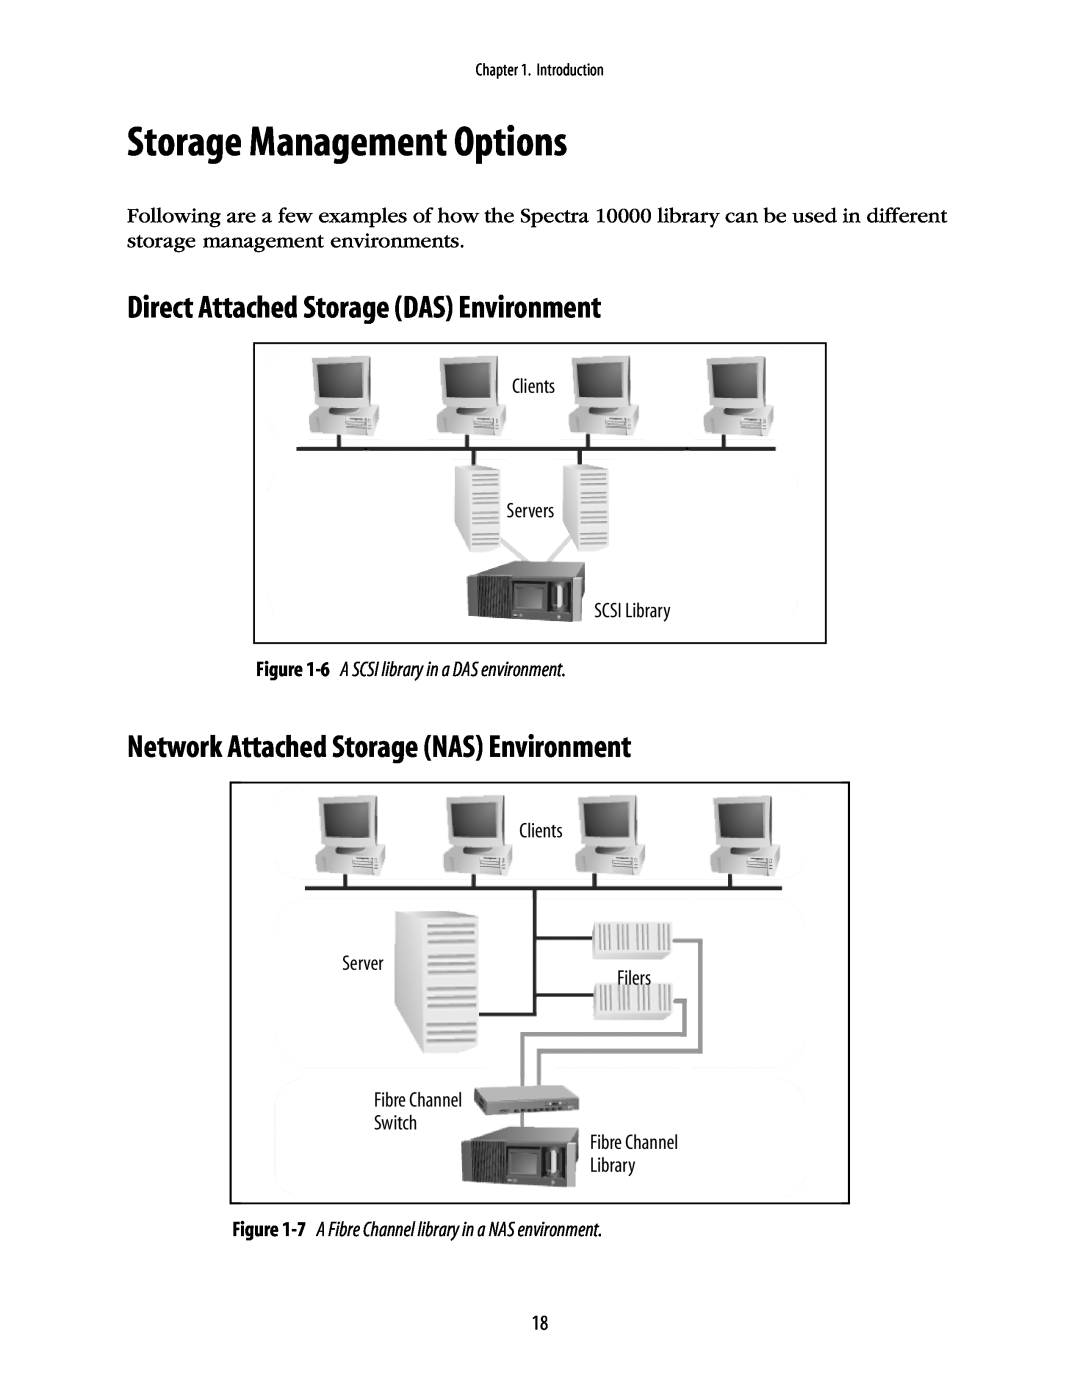 Spectra Logic 10000 manual Storage Management Options, Direct Attached Storage DAS Environment 